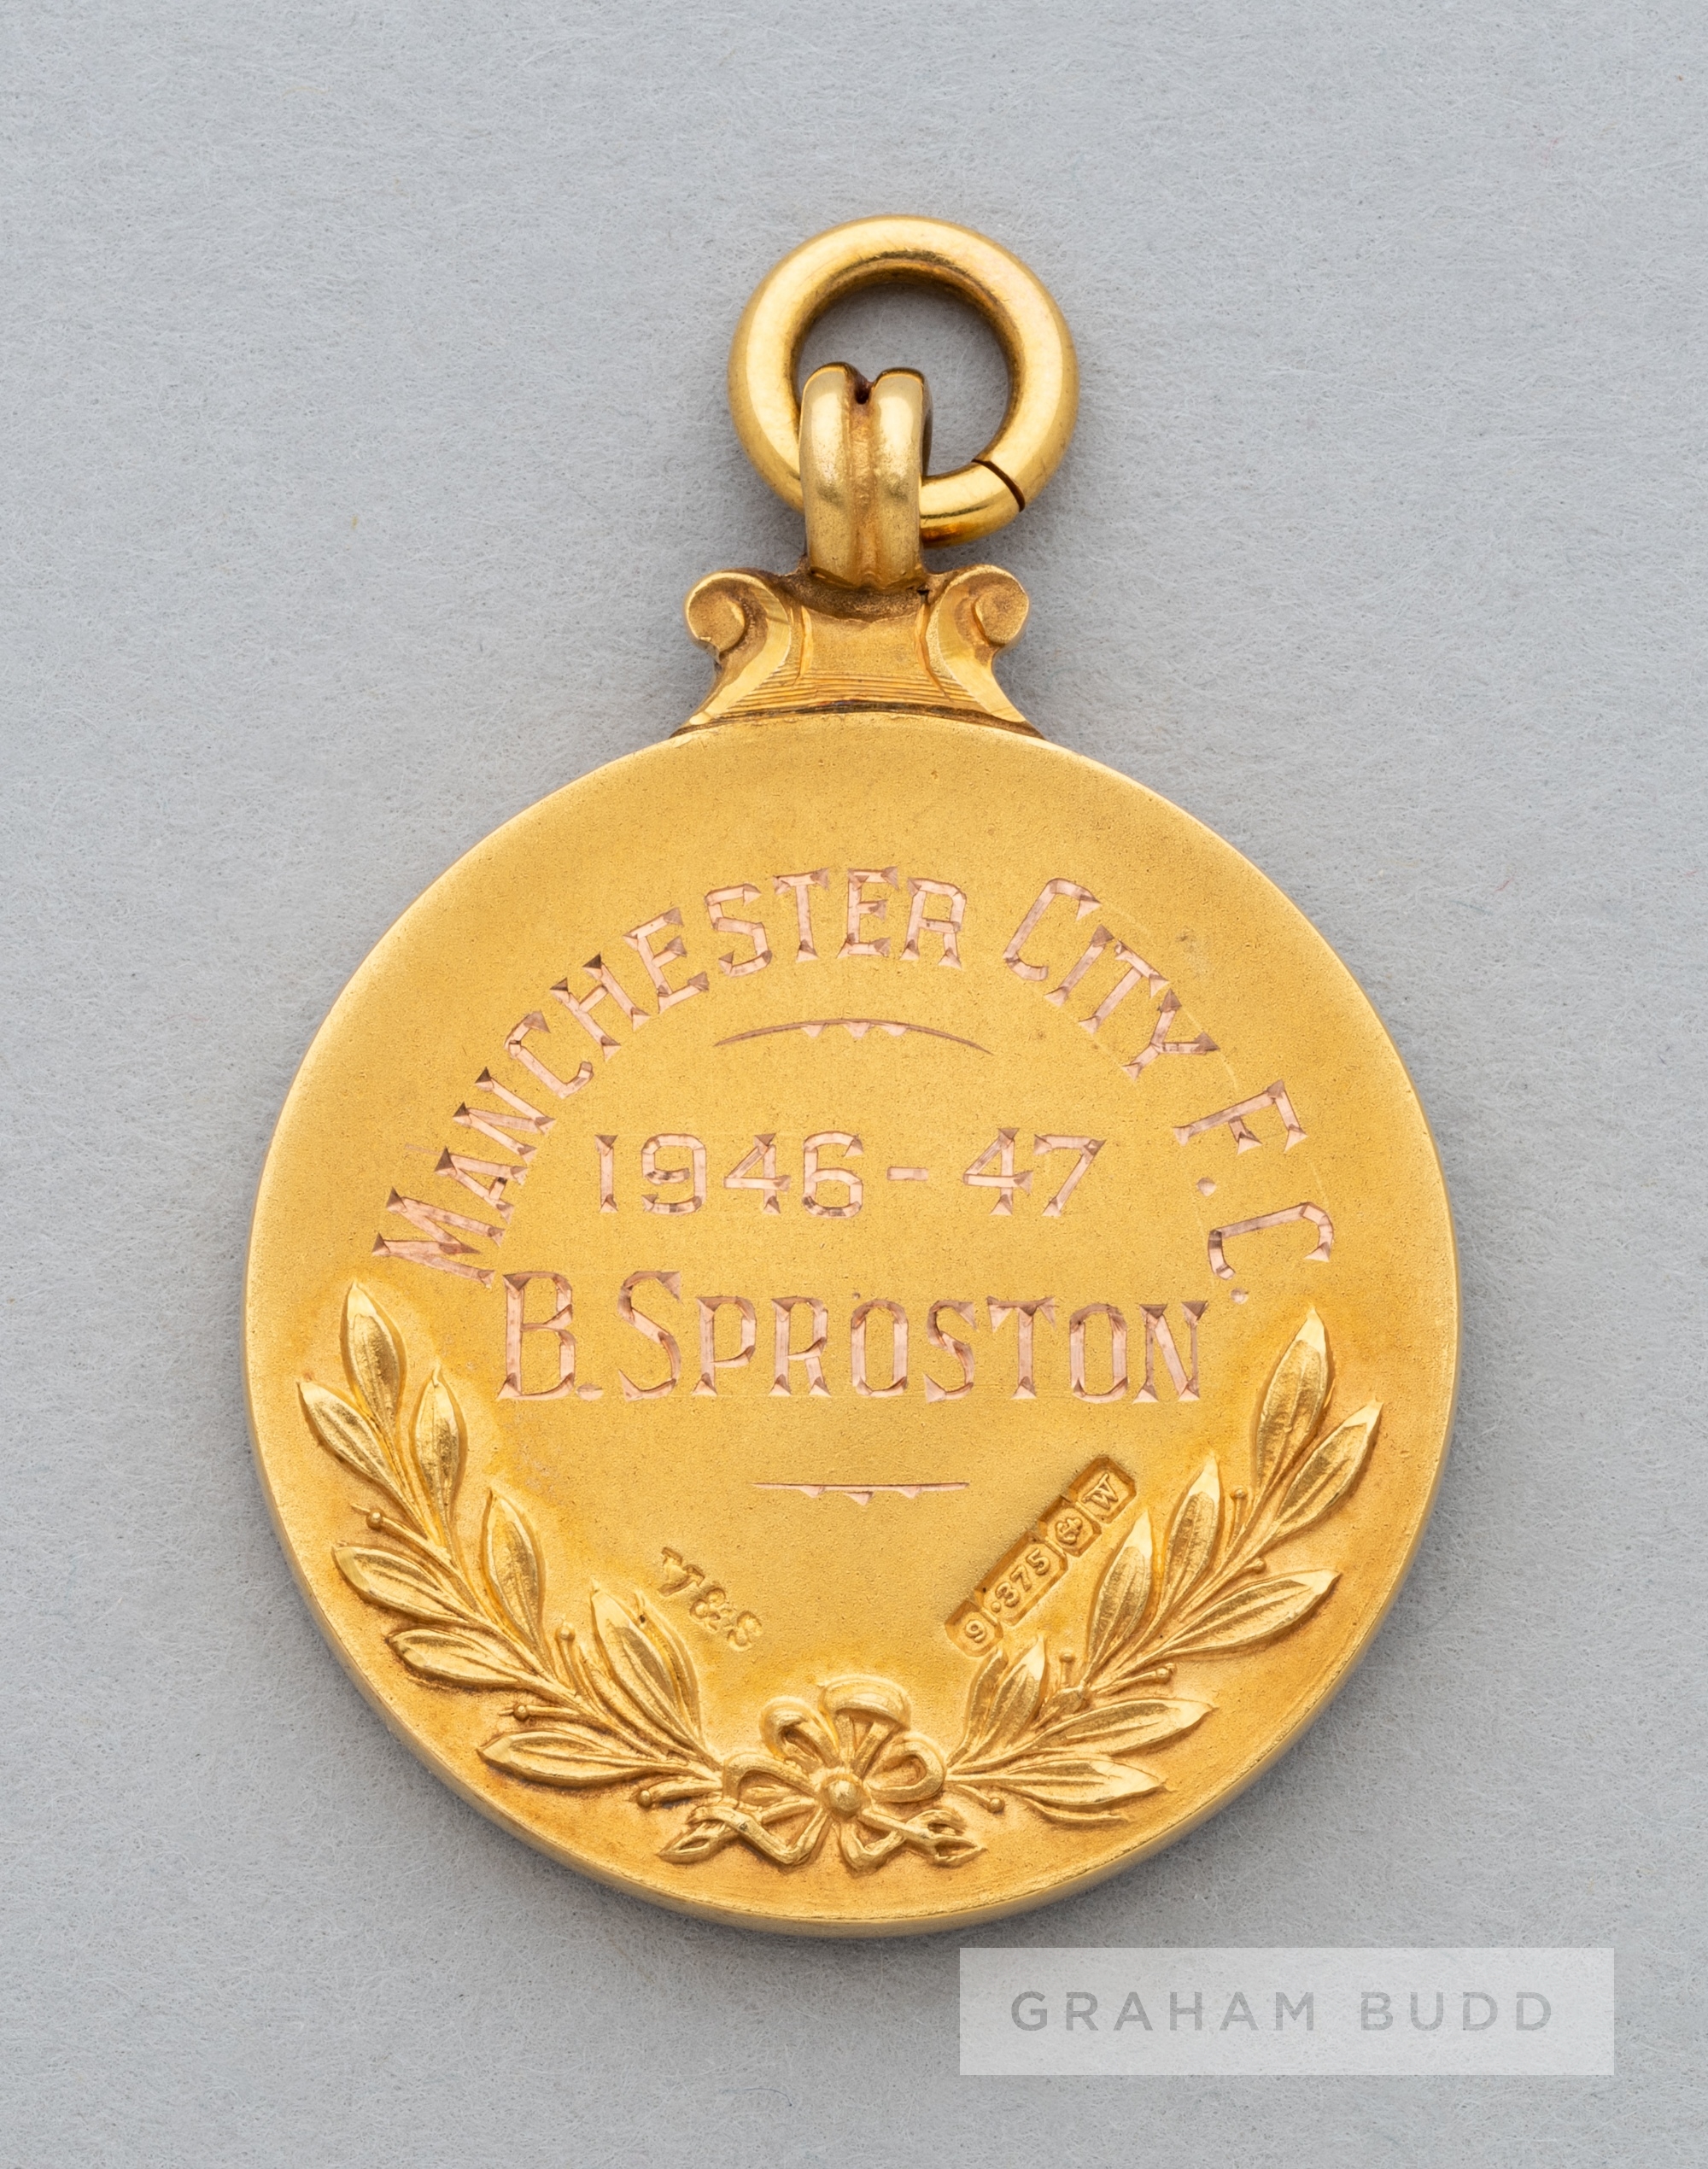 Football League 1946-47 Division Two Championship medal awarded to Bert Sproston of Manchester City, - Image 2 of 2